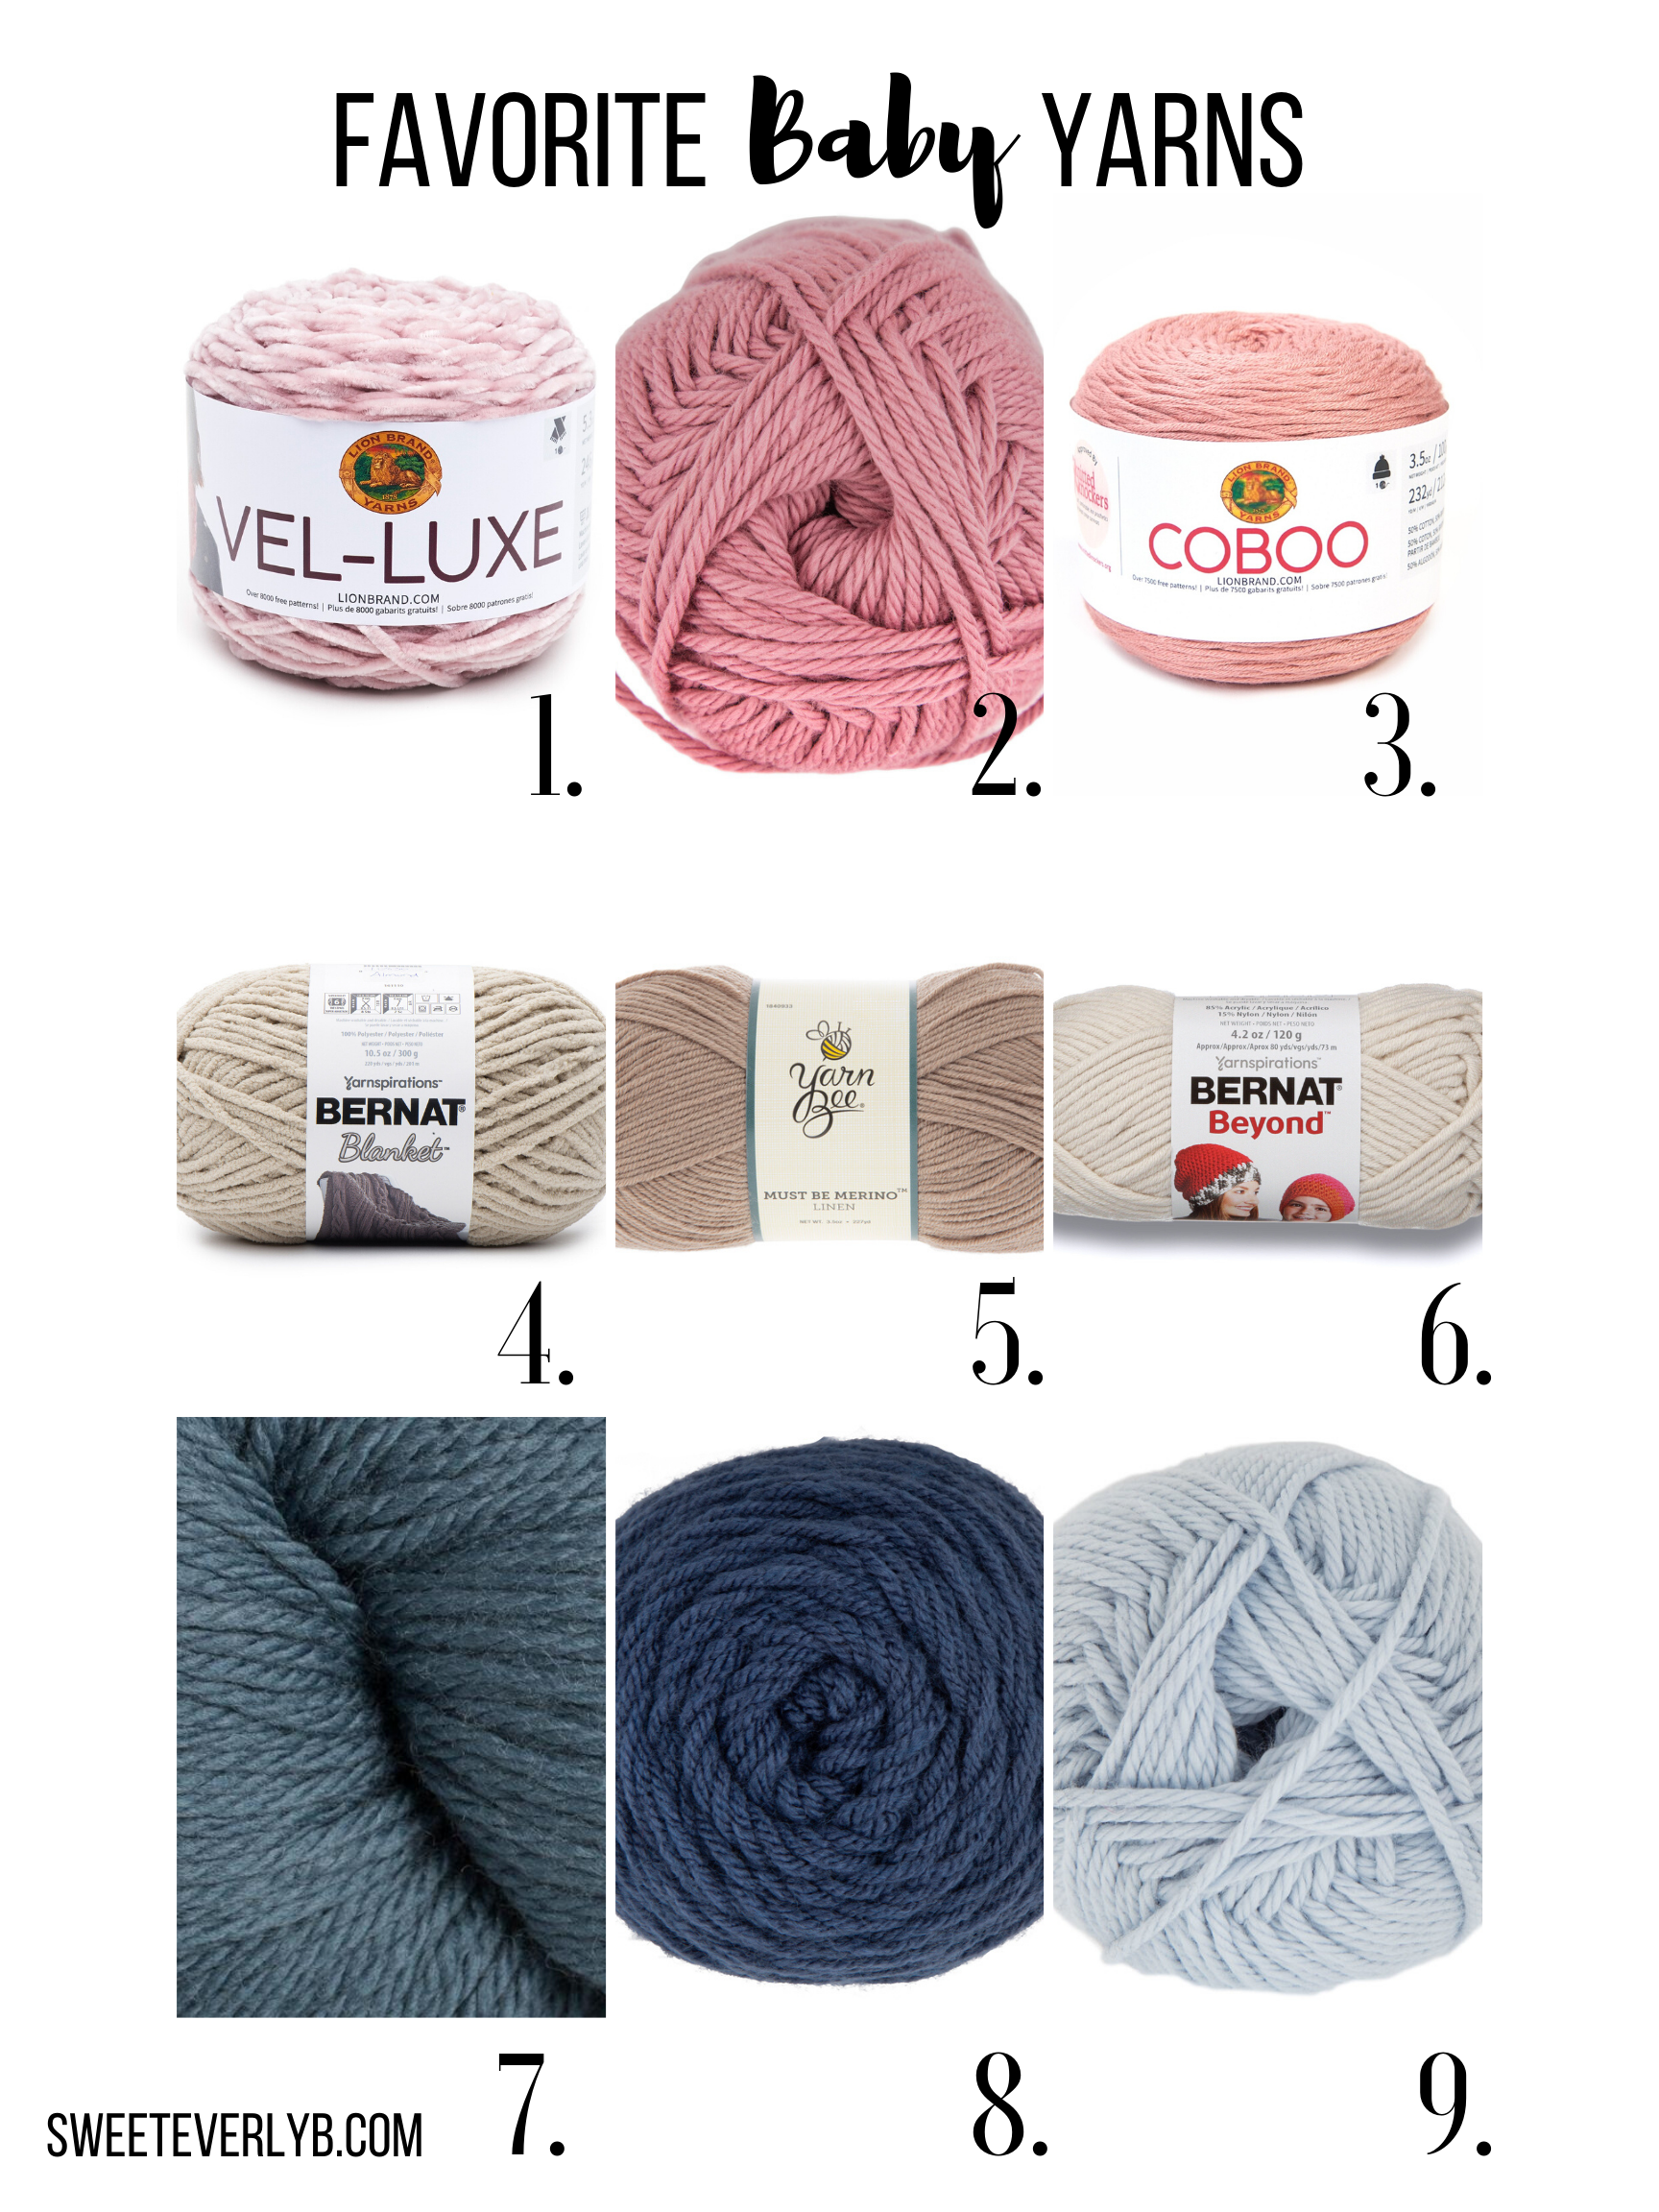 The Best Yarn for Baby Gifts - Sweet Everly B